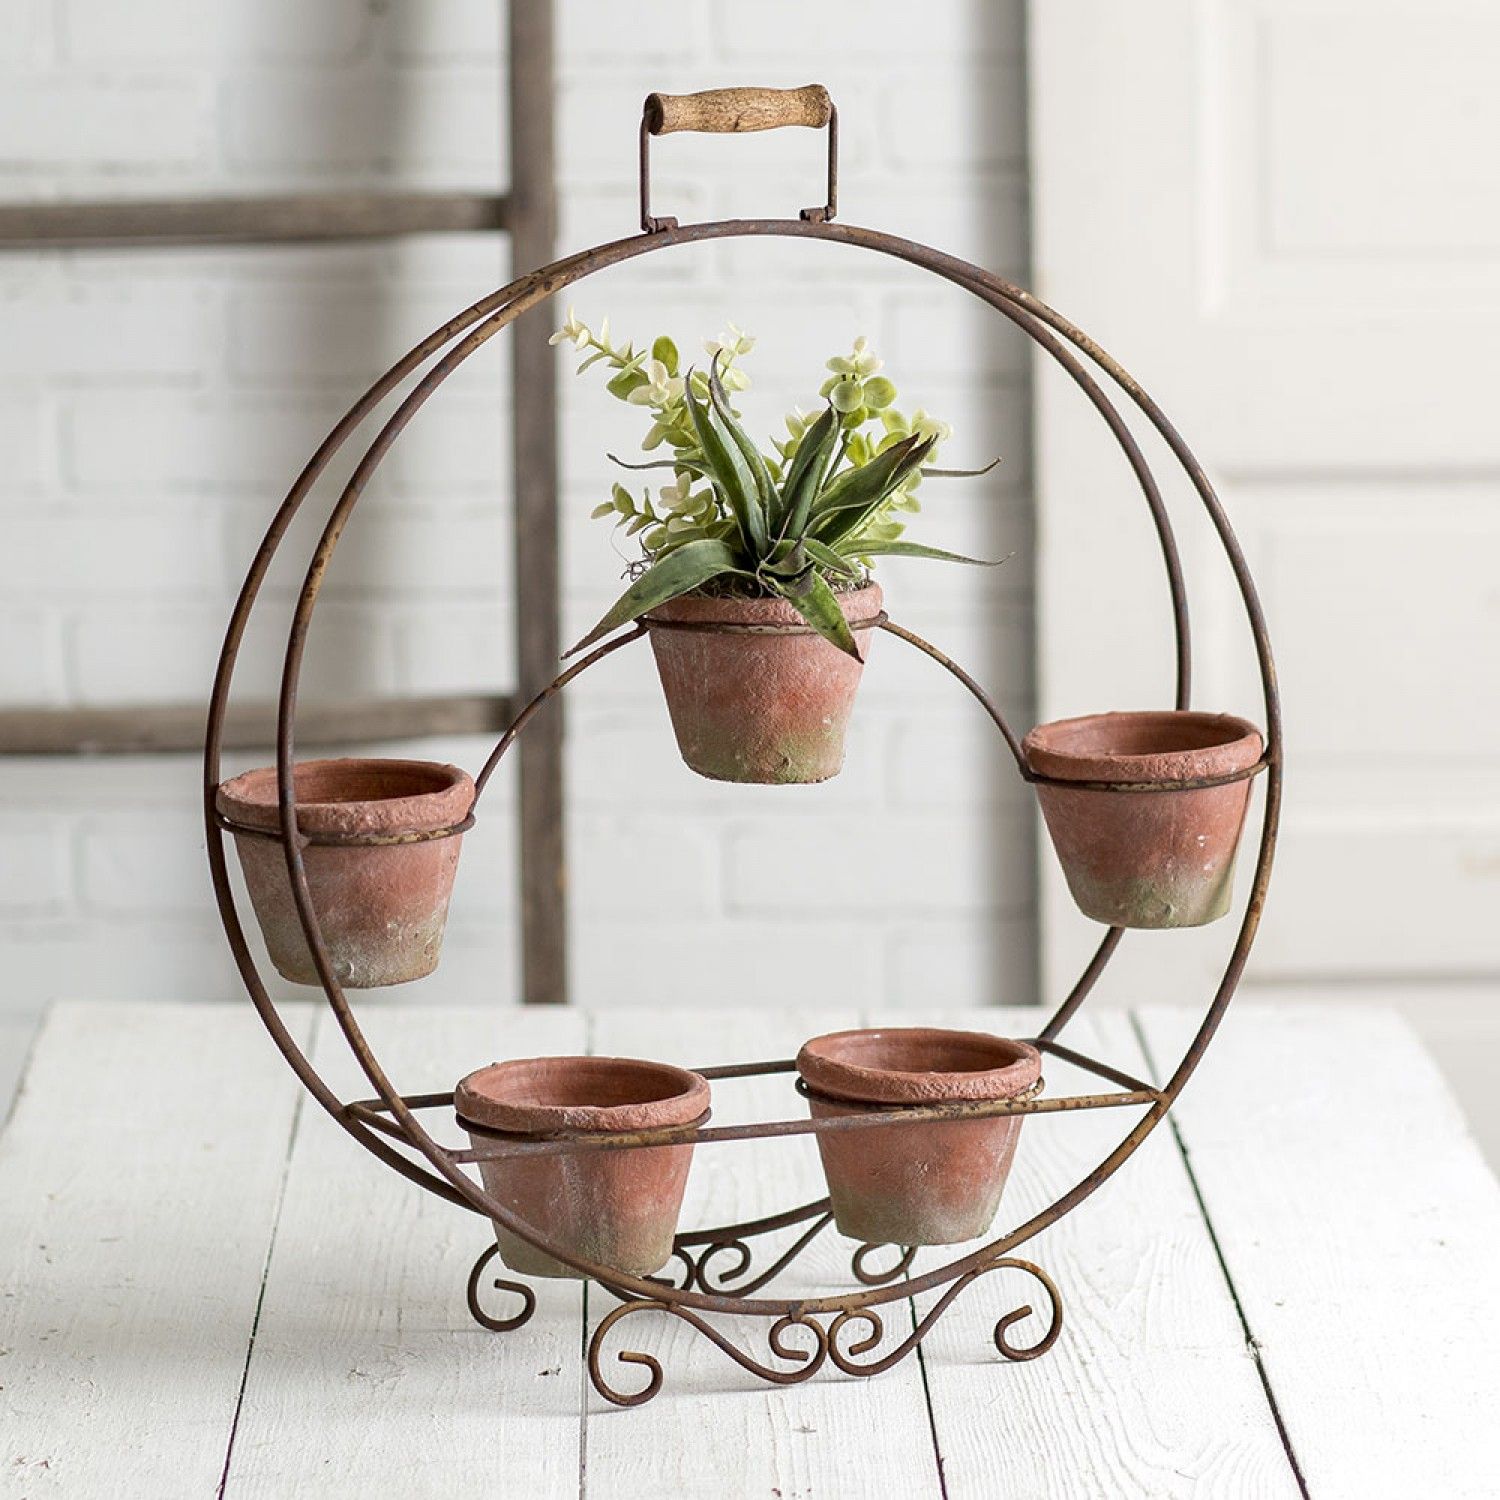 Farmhouse Rustic Round Plant Stand With Terra Cotta Pots Intended For Round Plant Stands (View 14 of 15)